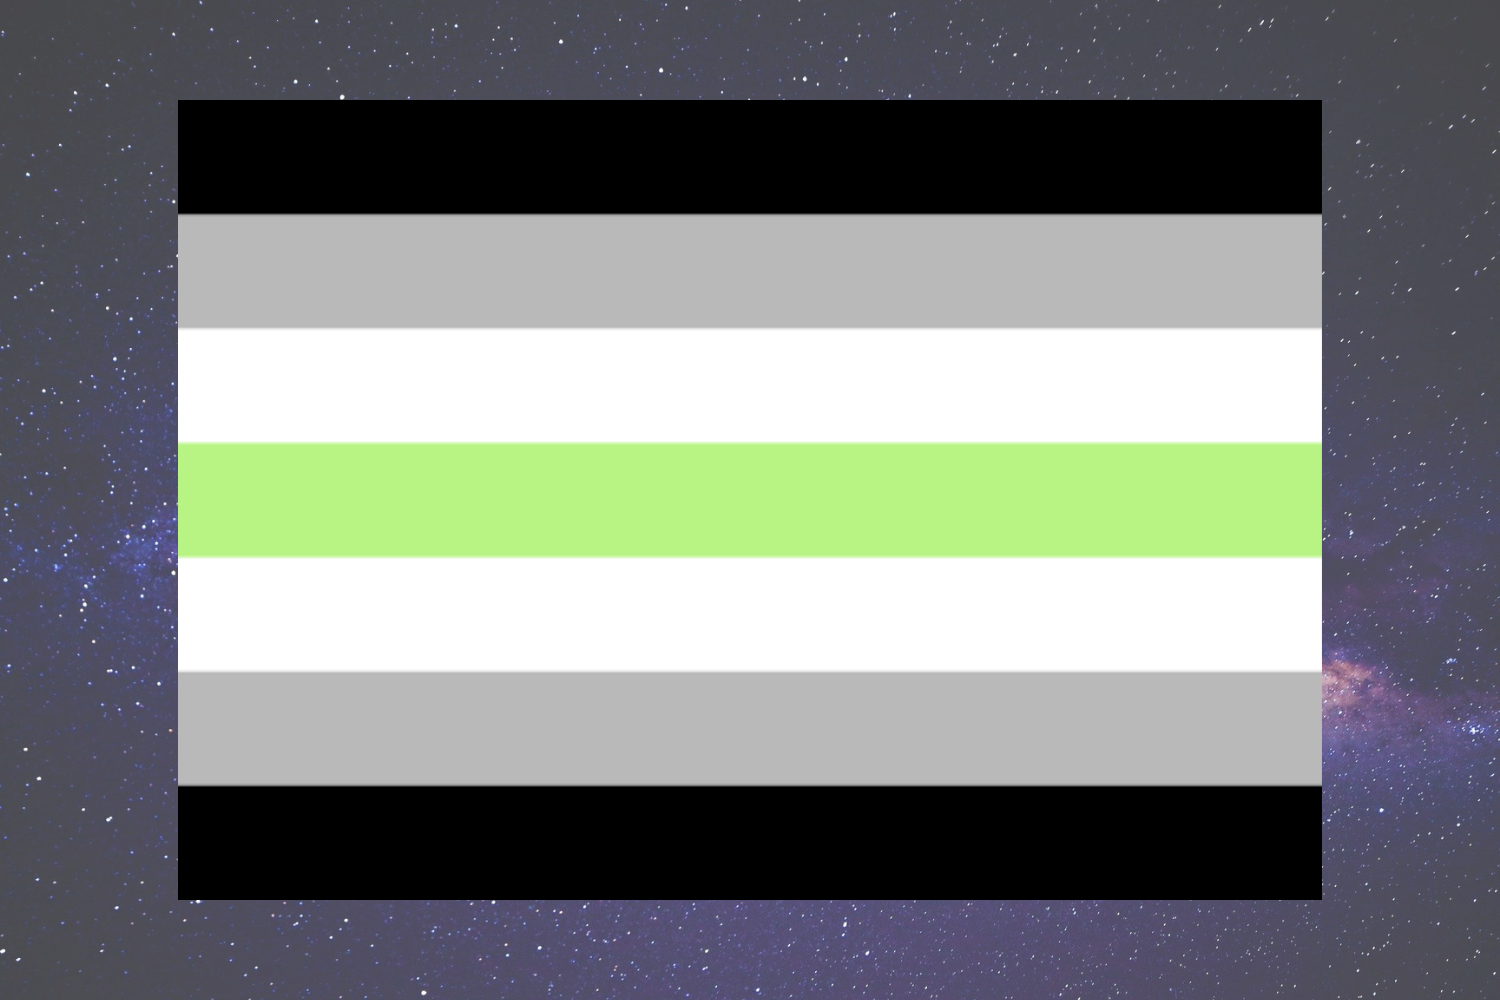 The Agender Flag - A flag with 7 horizontal stripes: two black stripes on the top and bottom, two grey stripes one step closer to the center, two white stripes on top and below a green stripe through the middle. The black and white represent agender experiences, the grey represents demi-agender experiences, and the green represents agender being a part of the wider non-binary community as those who identify outside of the binary gender spectrum.